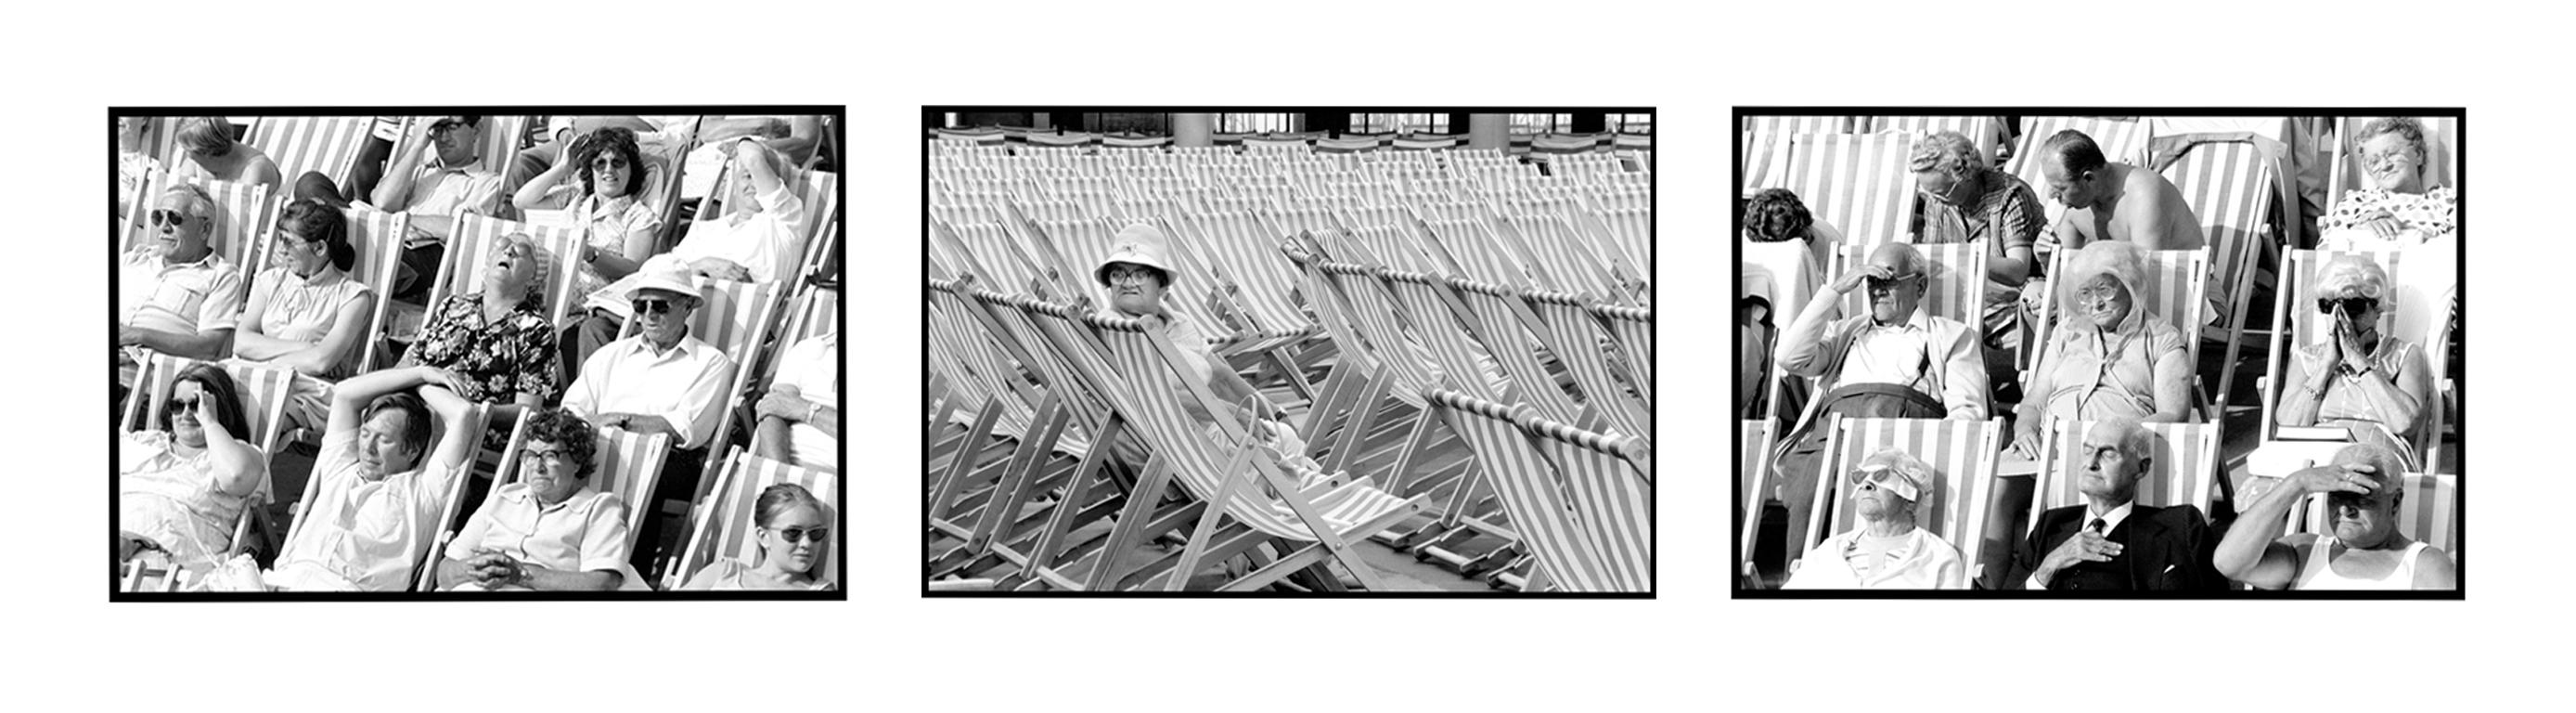 Bandstand, Eastbourne - Black & White Photography Triptych - Gray Portrait Photograph by Samuel Field